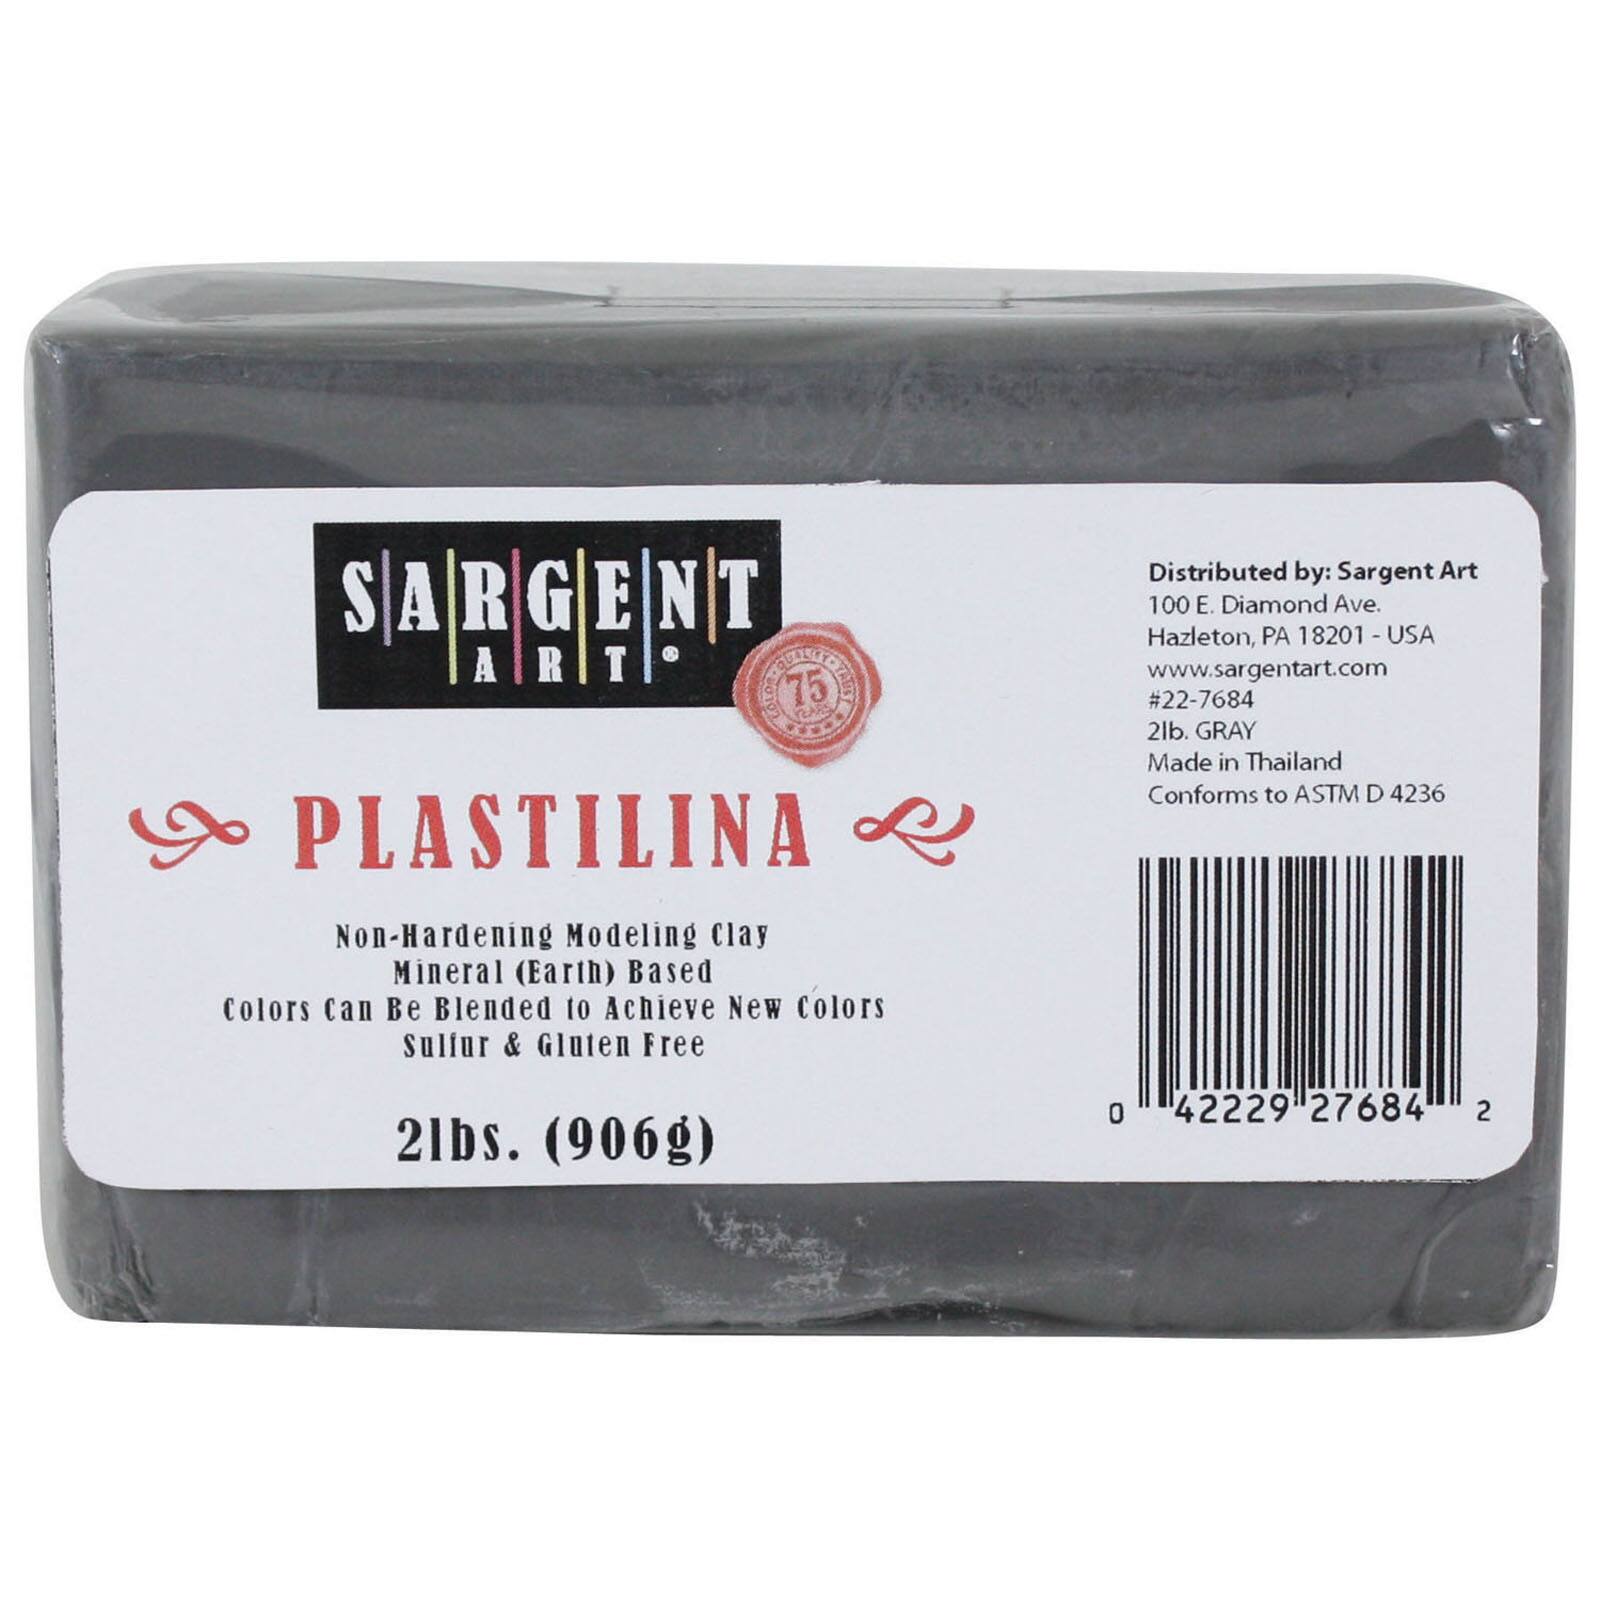 Sargent Art Plastilina Modeling Clay White 2 Pound Non-Hardening Long  Lasting & Non-Toxic Great for Kids Beginners and Artists